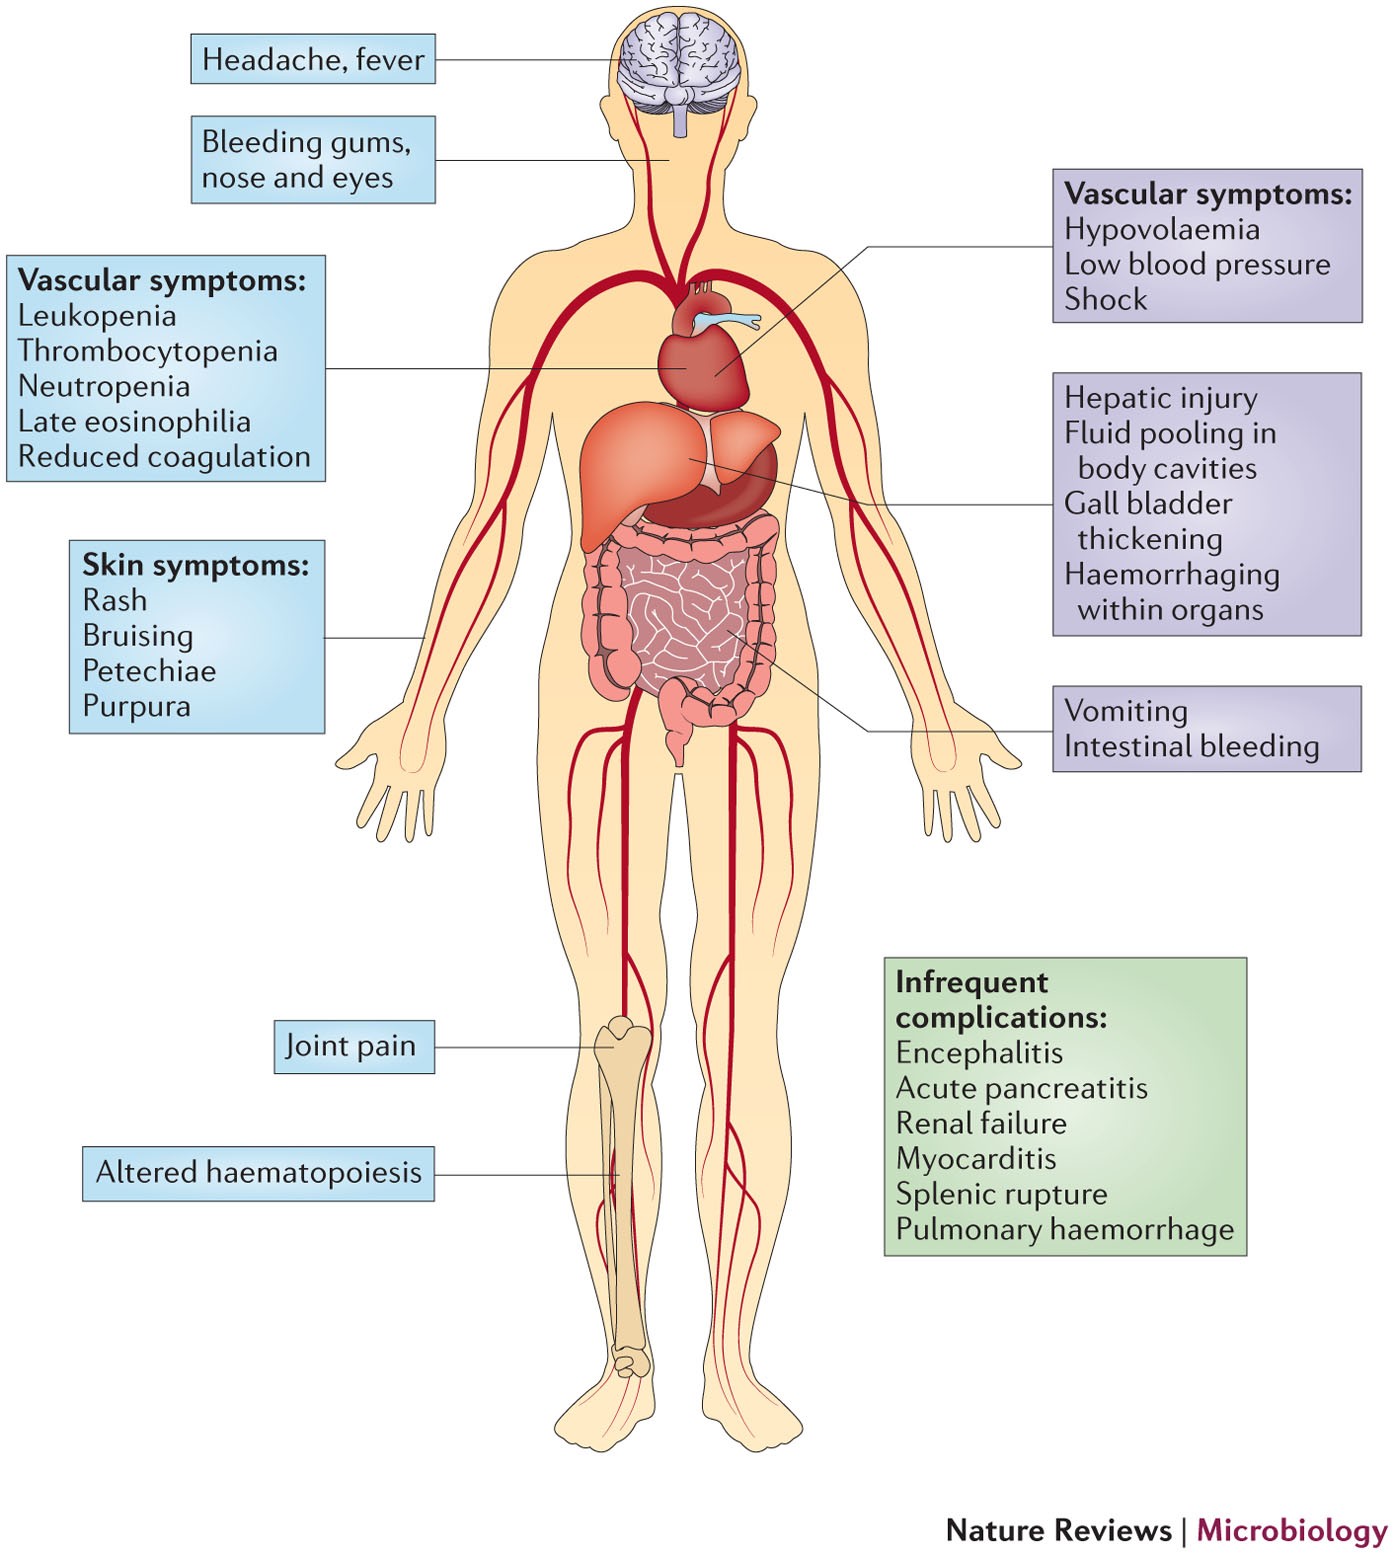 Barriers preclinical of anti-dengue immunity and dengue Nature Reviews Microbiology